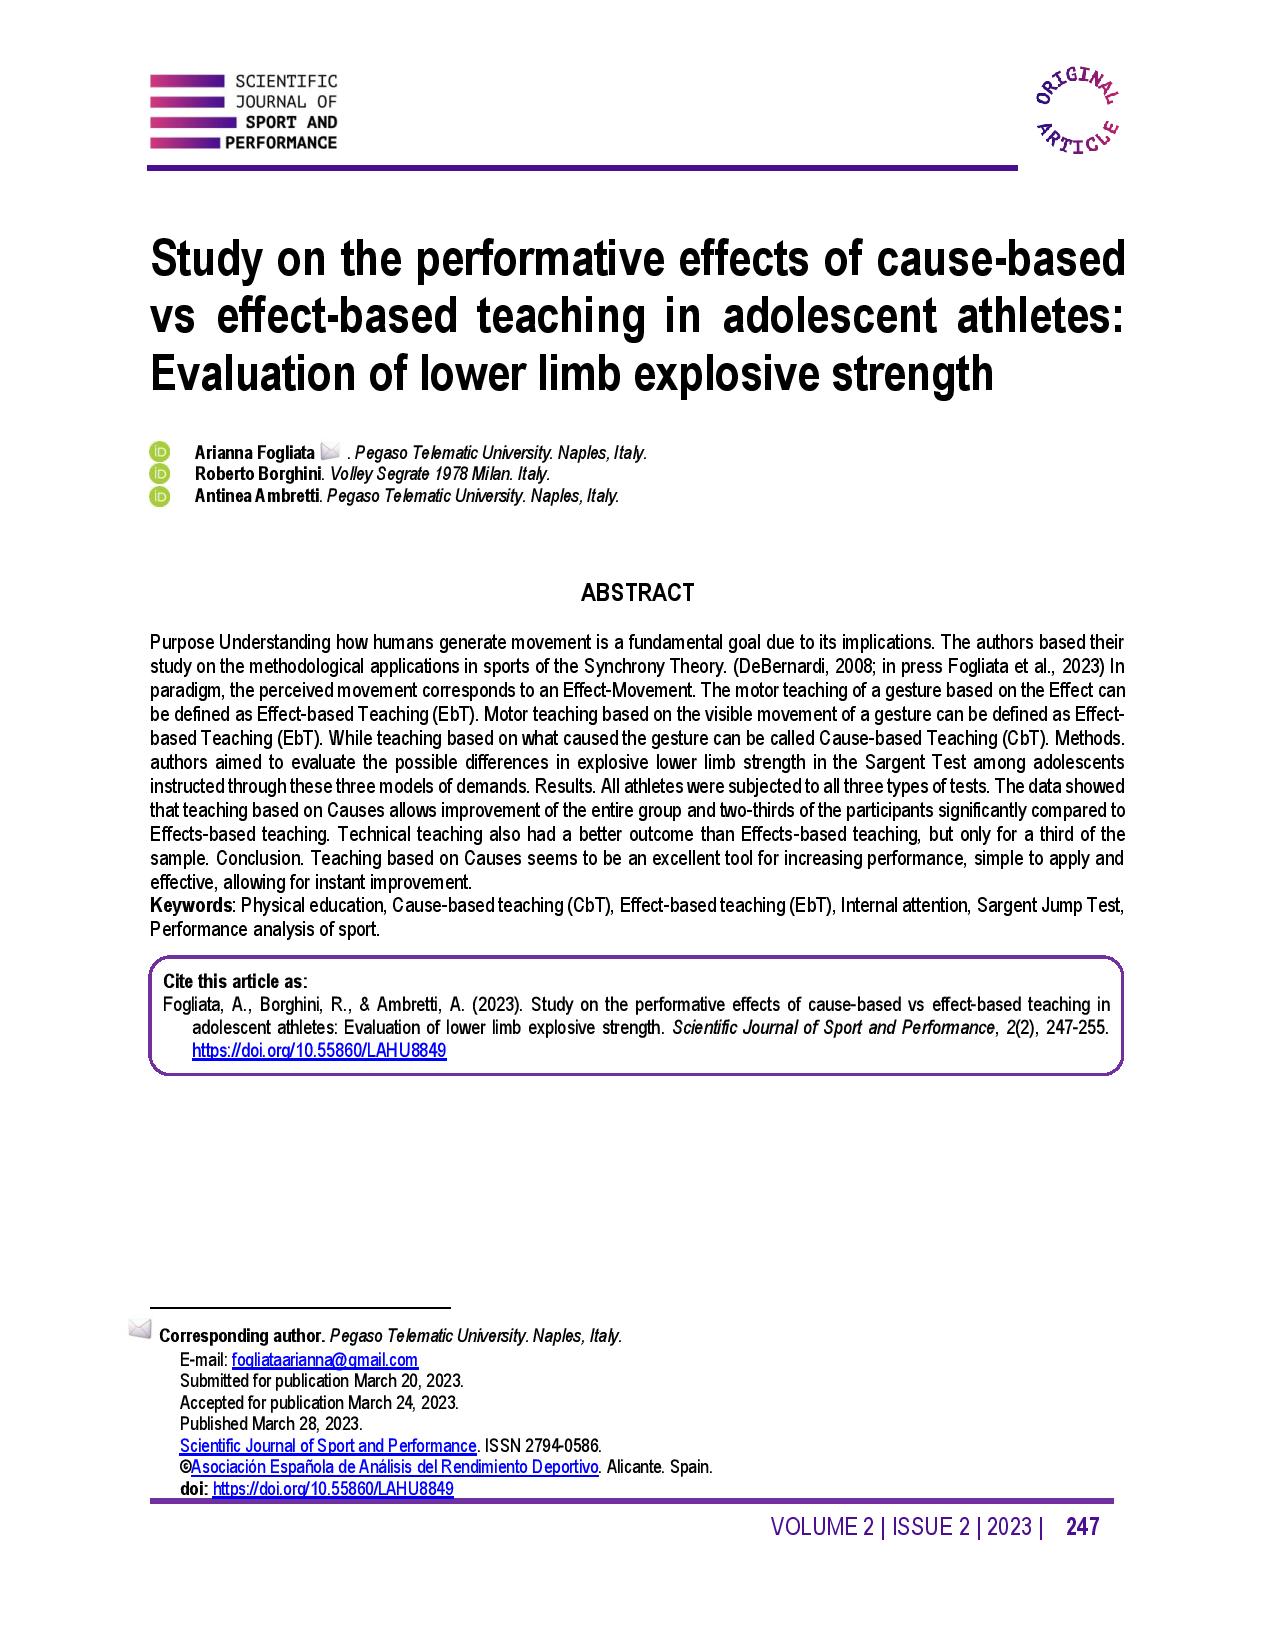 Study on the performative effects of cause-based vs effect-based teaching in adolescent athletes: Evaluation of lower limb explosive strength